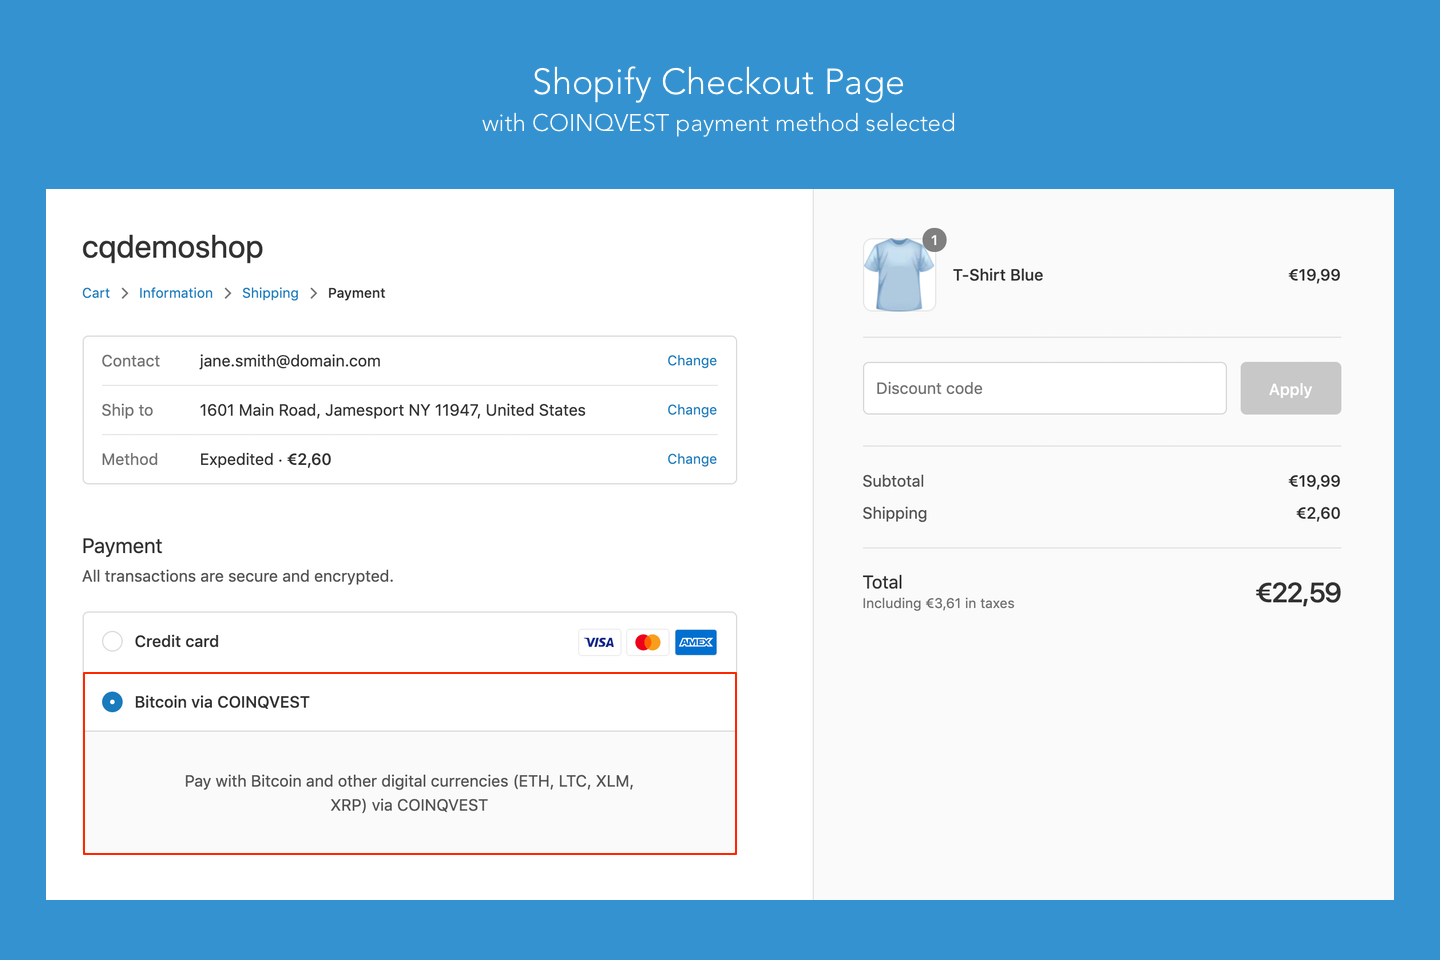 Shopify checkout page with COINQVEST payment method selected